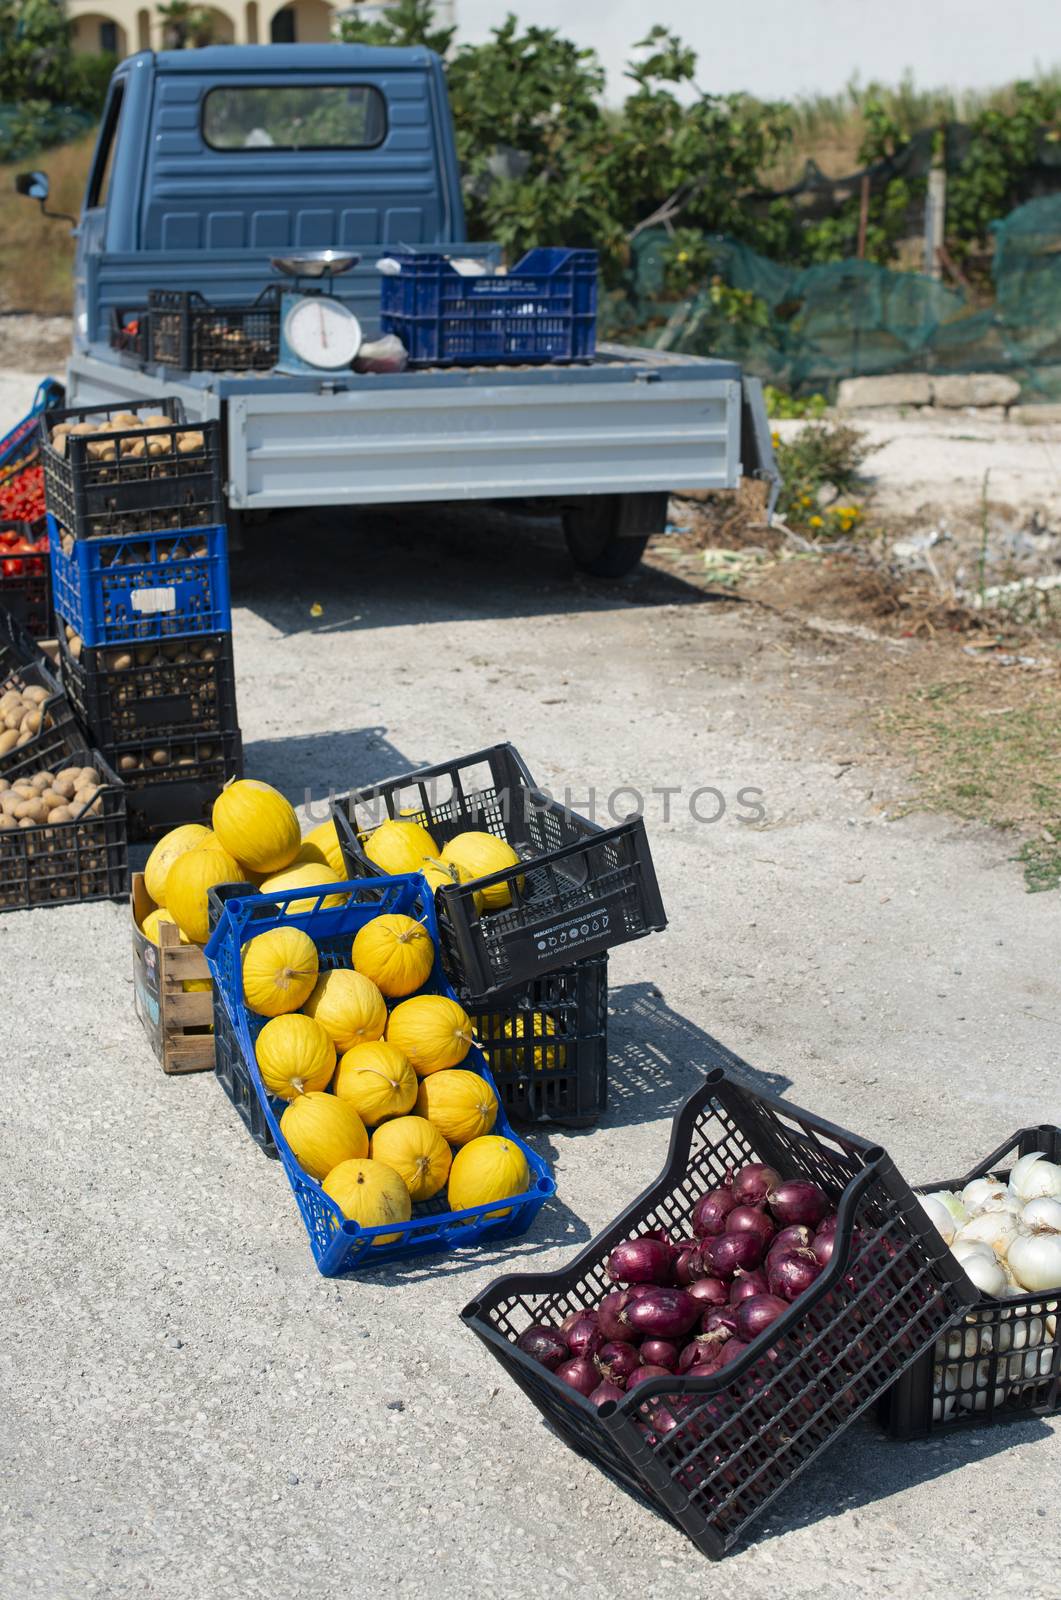 Small italian apo truck. Street vegetable market. Farmer sale melons and onion on the street in Italy.